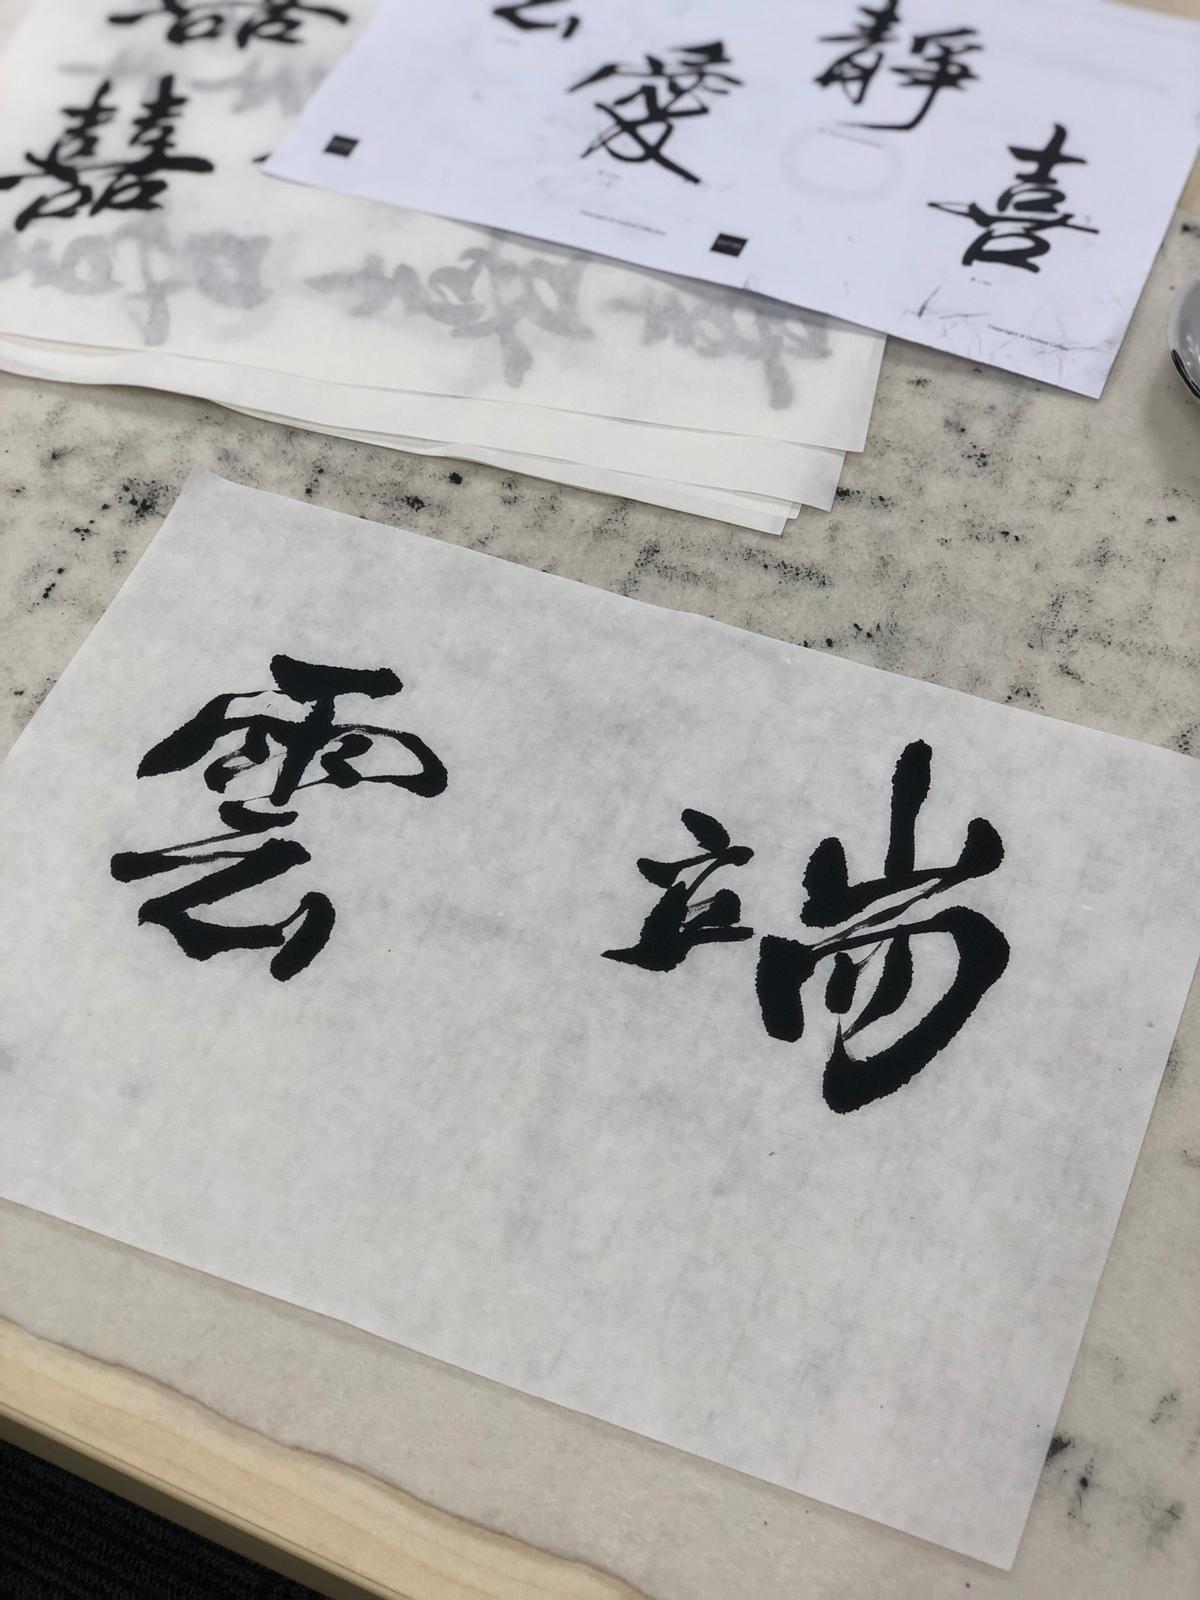 Chinese Calligraphy Workshop - Running Script